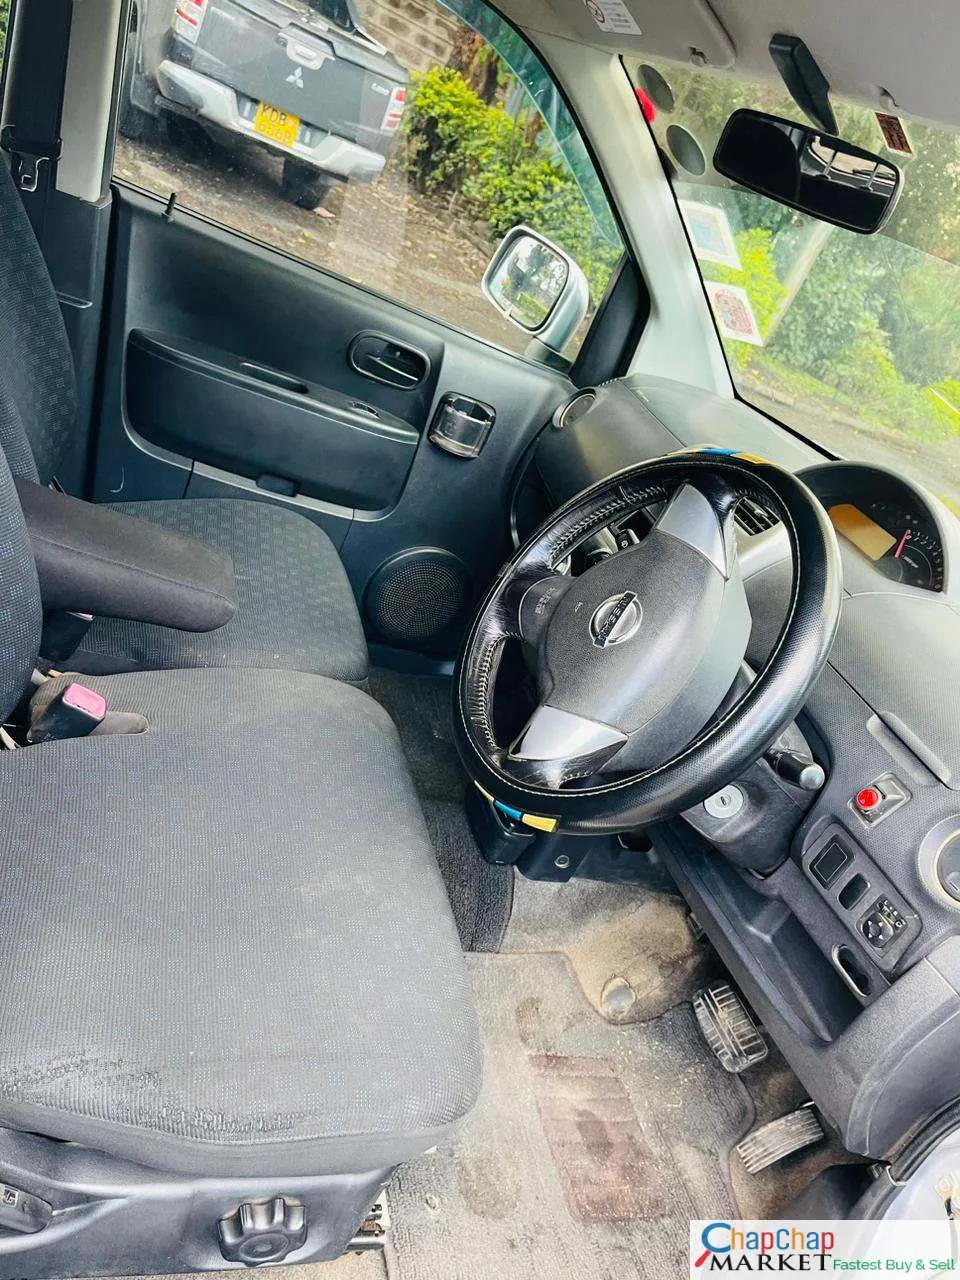 Nissan Otti Kenya QUICK SALE You ONLY Pay 30% Deposit Trade in Ok Nissan Otti for sale in kenya hire purchase installments EXCLUSIVE